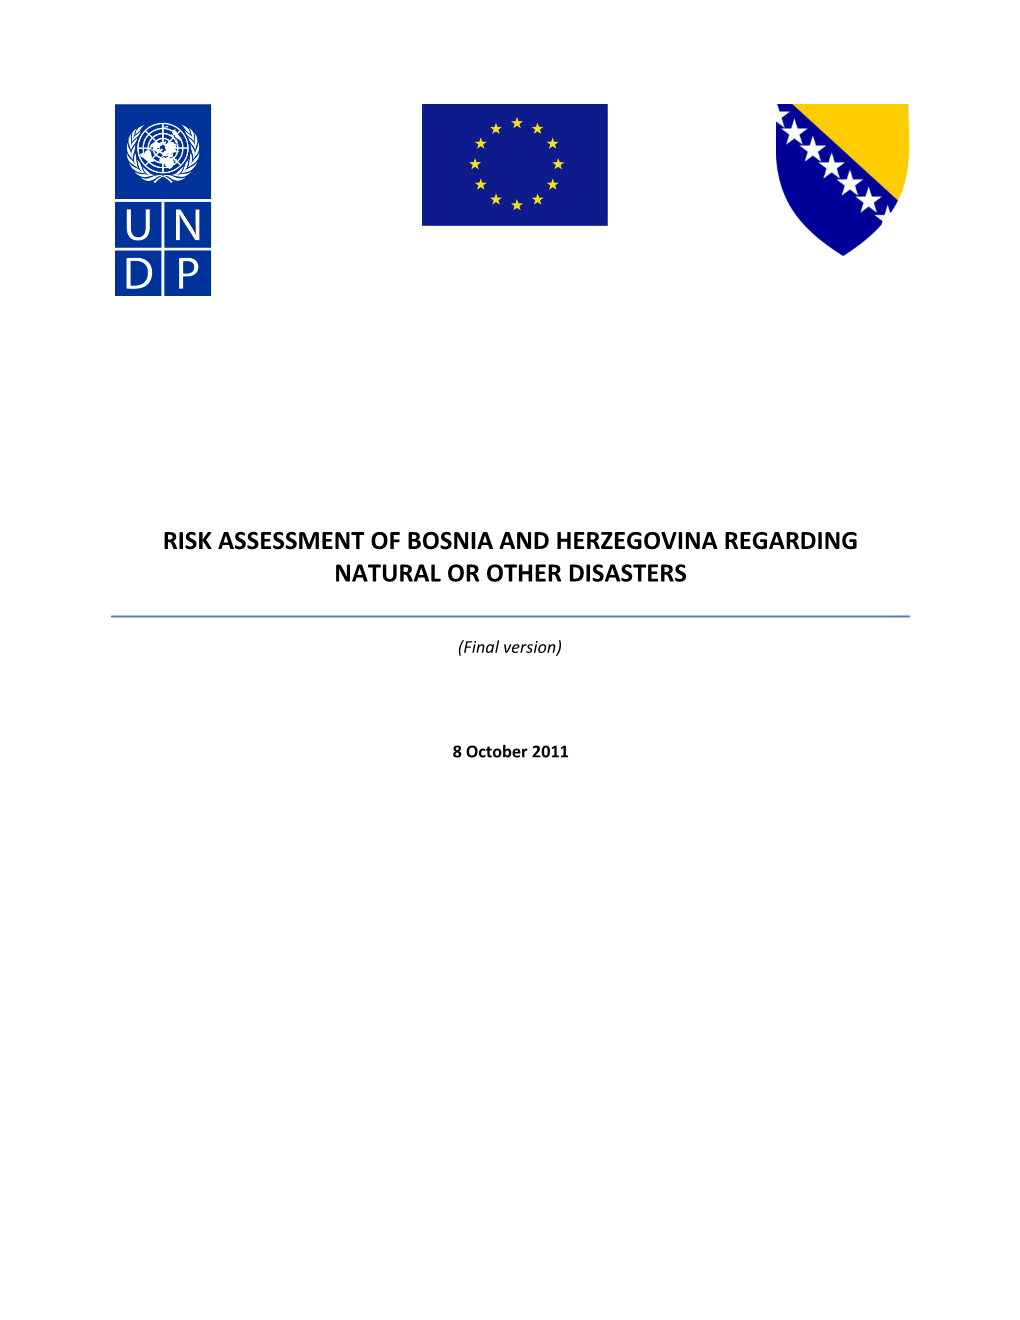 The Document Risk Assessment of Bosnia and Herzegovina Regarding Natural Or Other Disasters